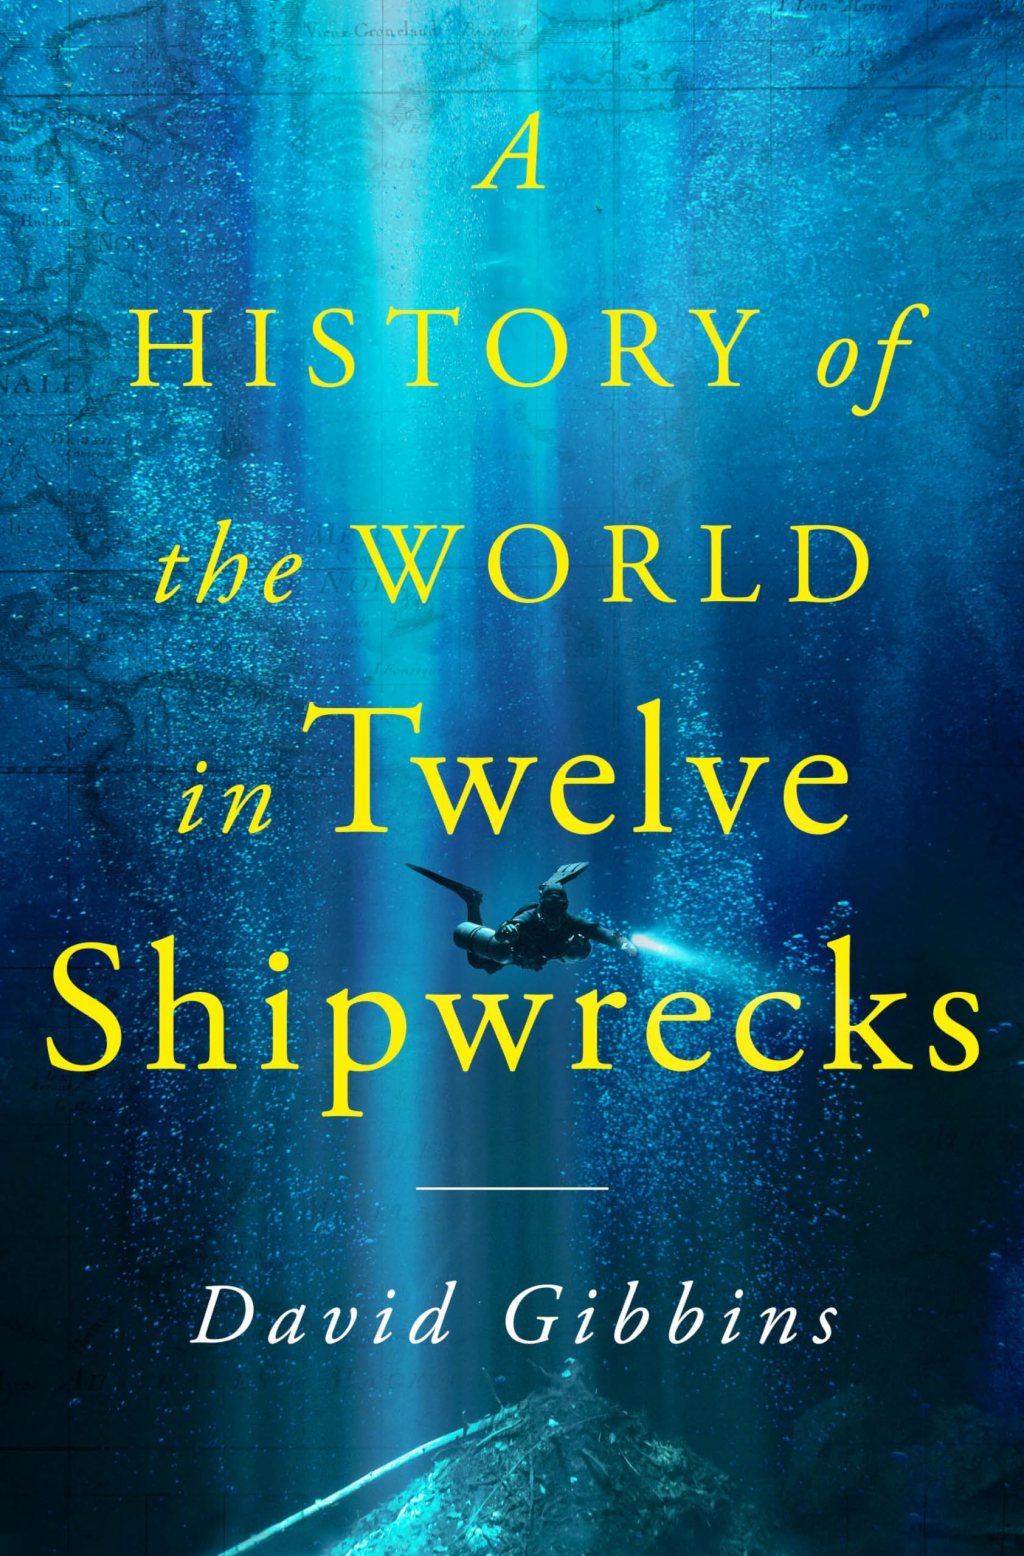 Book Review: A History of the World in Twelve Shipwrecks by David Gibbins (non-fiction)